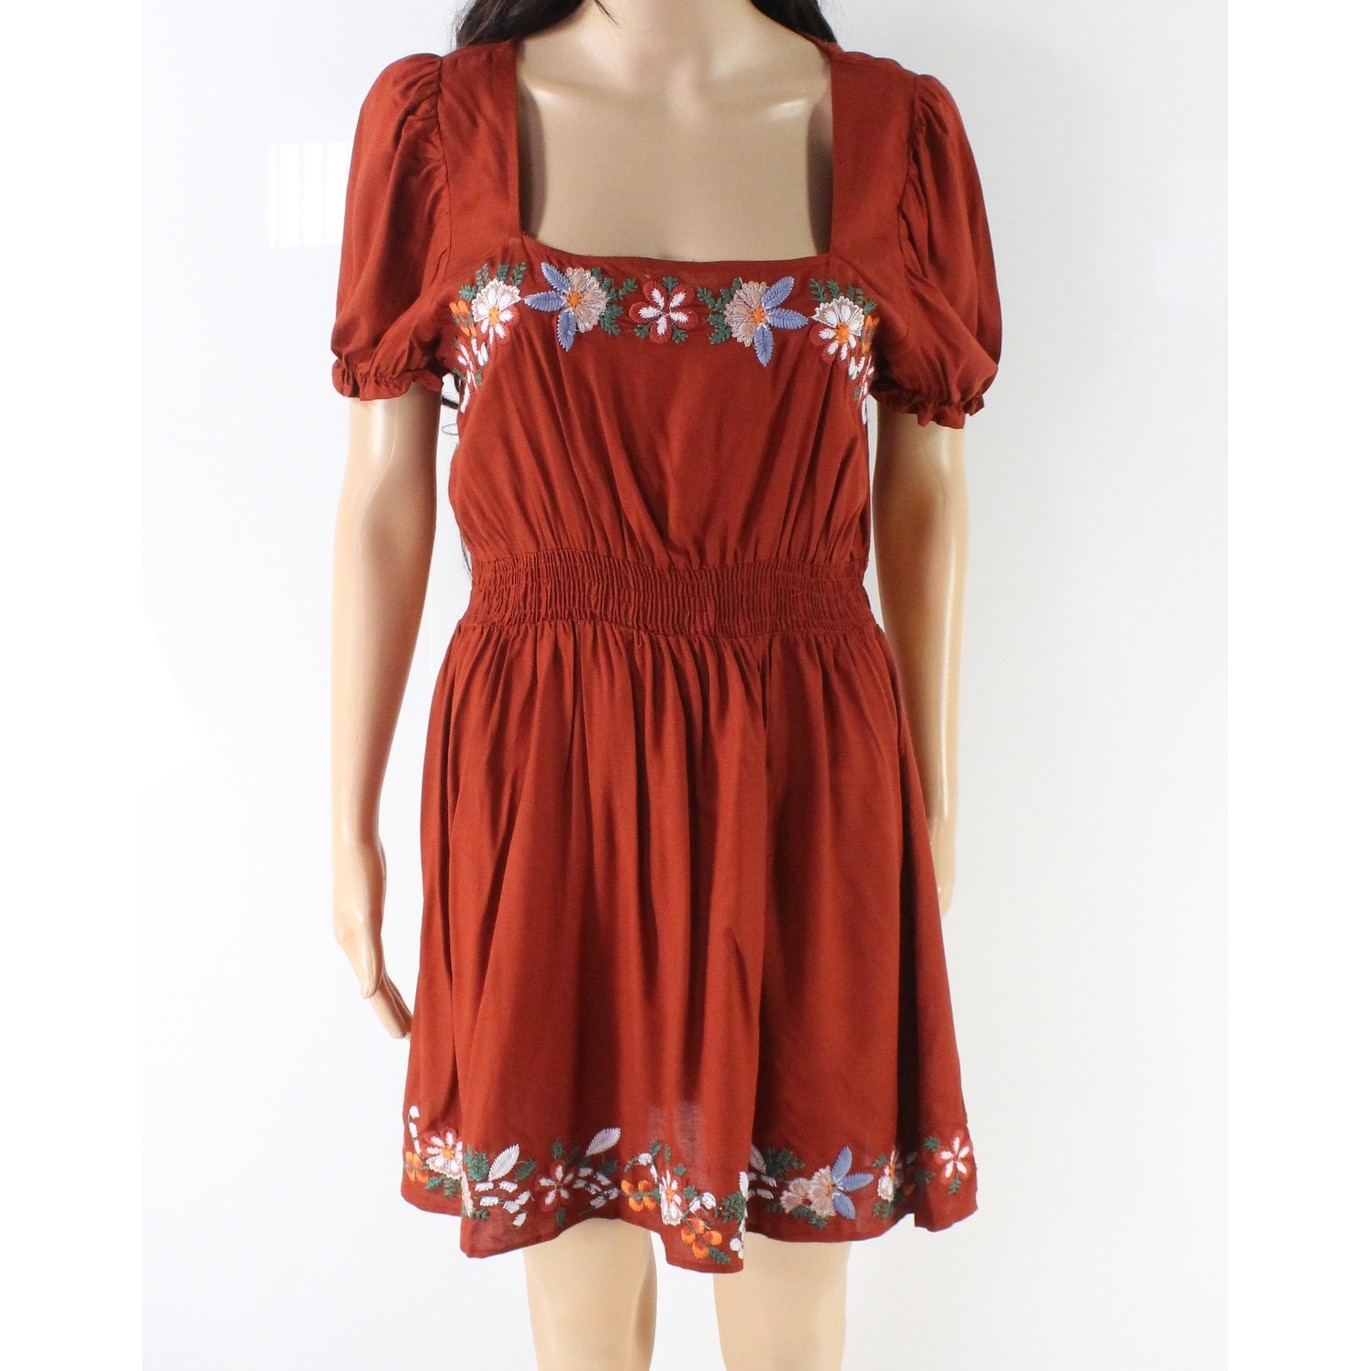 Angie Womens Embroidered Neckline Sundress